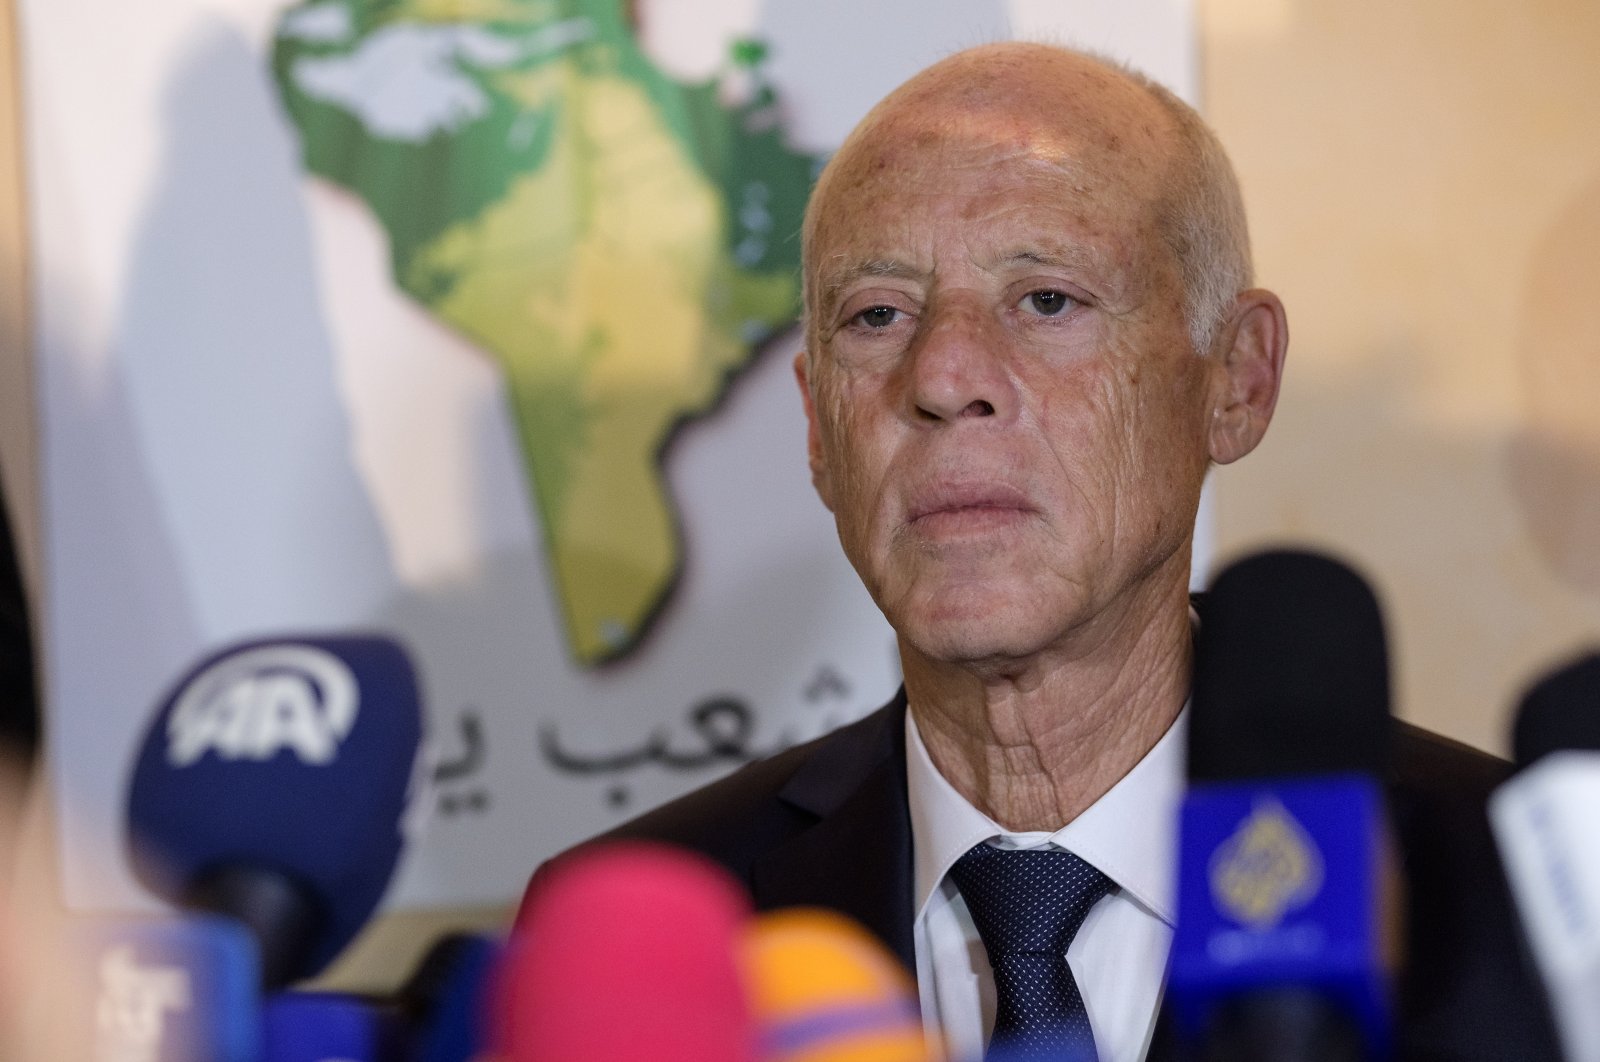 Then-Tunisian presidential candidate Kais Saied talks to media on October 13, 2019, Tunis, Tunisia. (Getty Images)